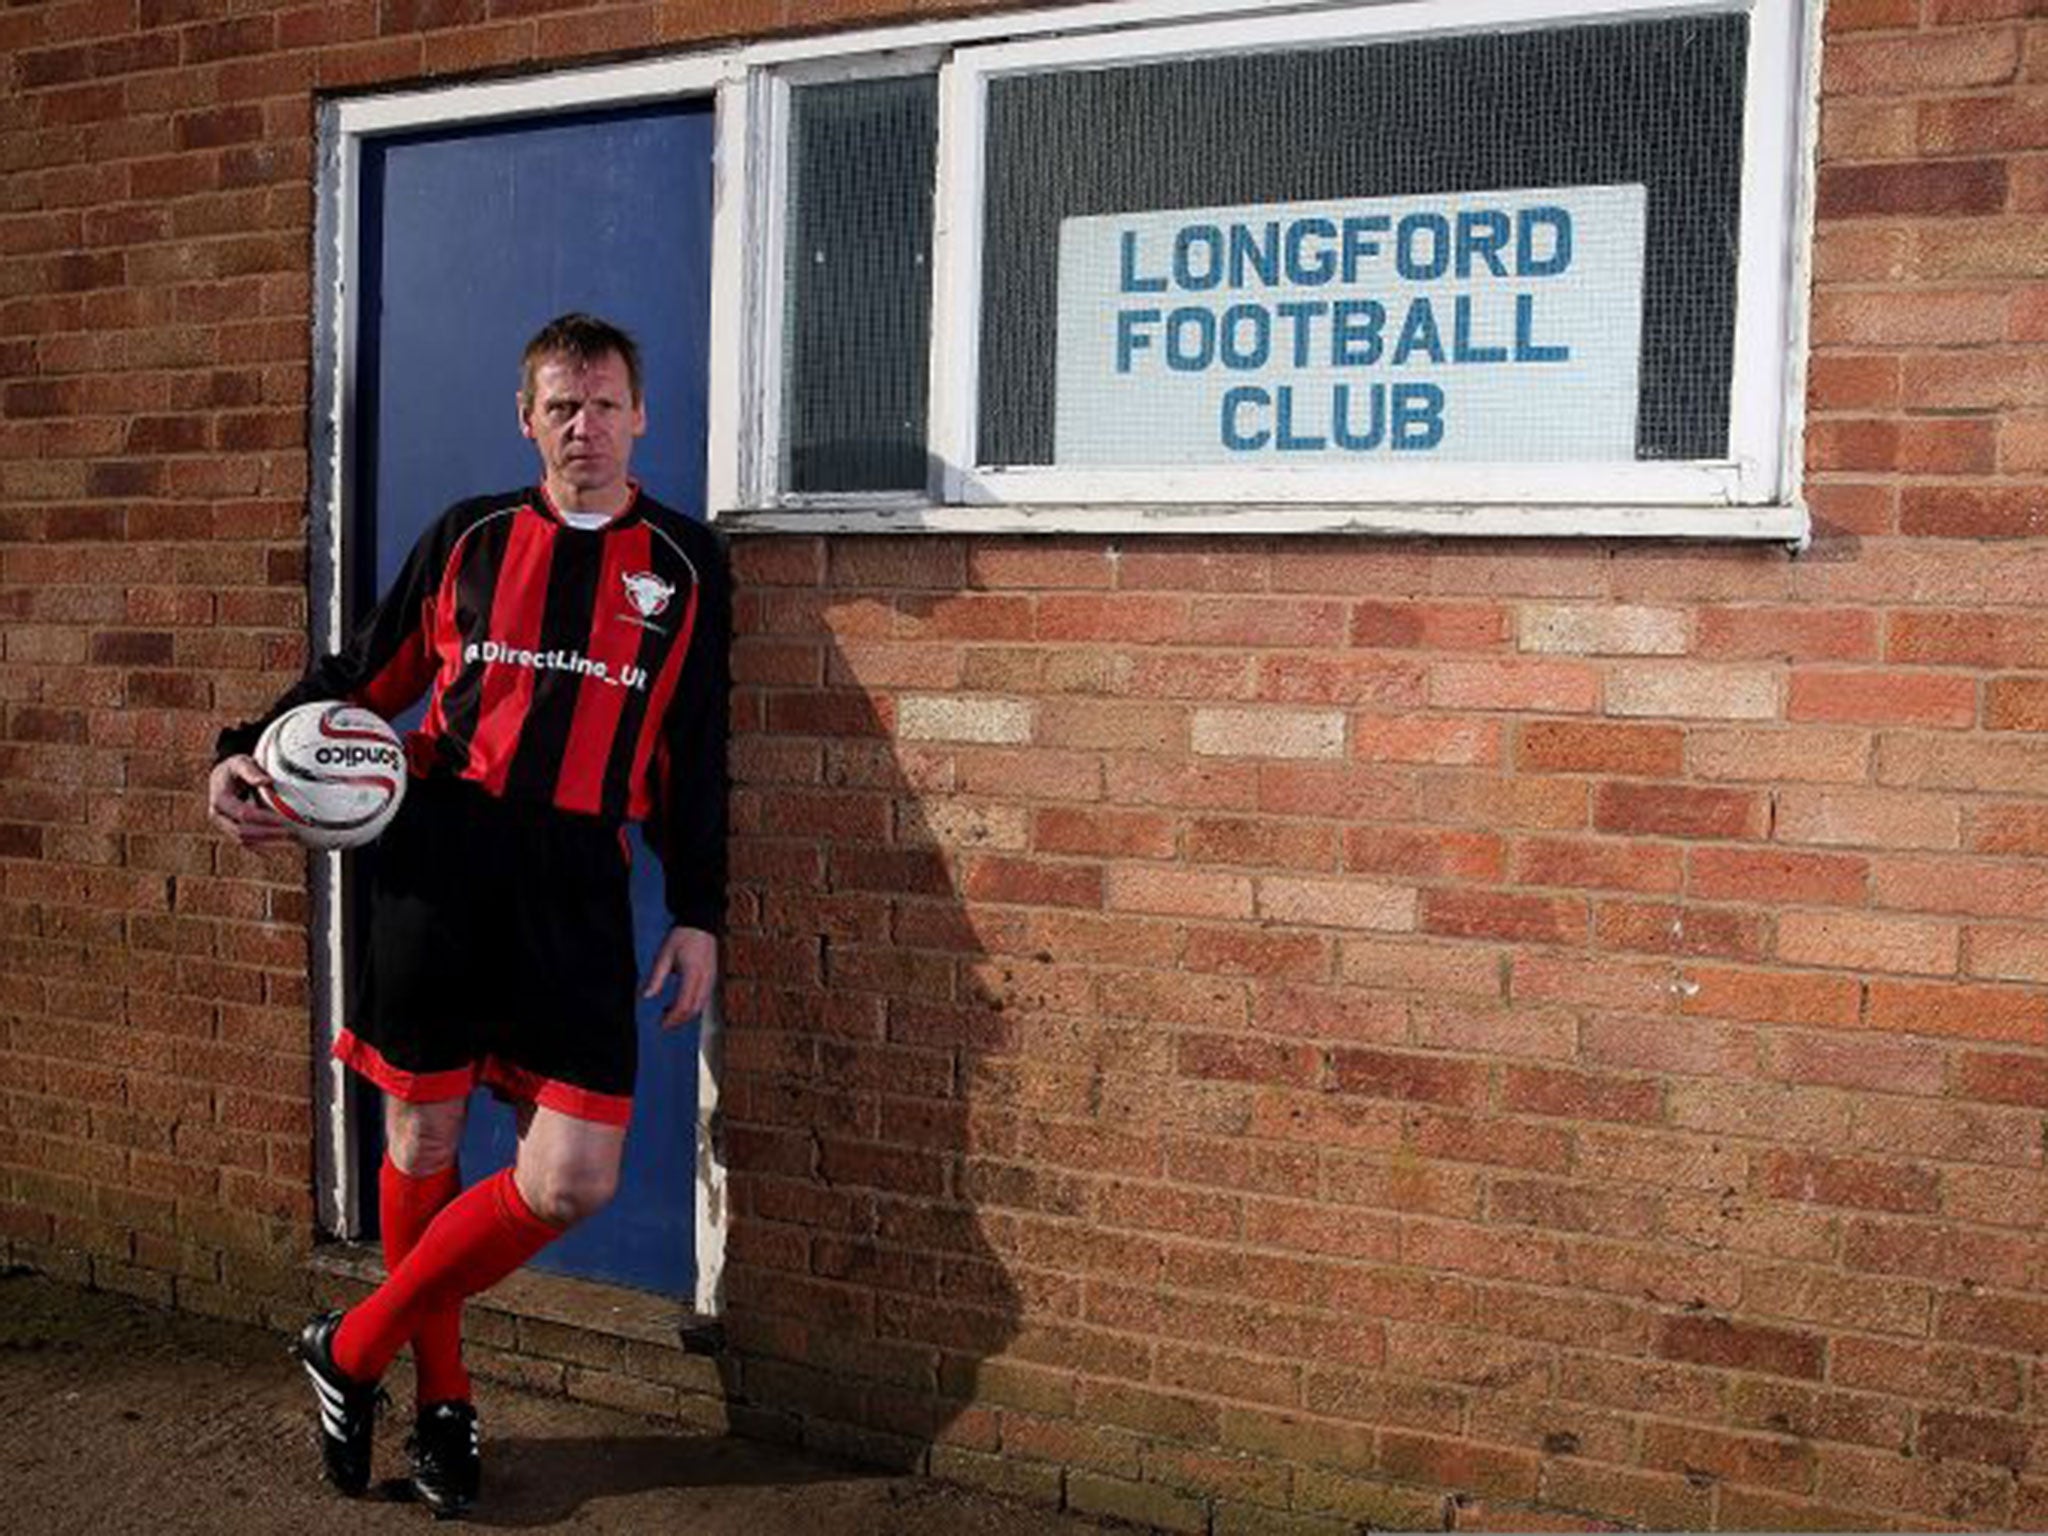 Stuart Pearce after he was unveiled by Longford AFC, the team dubbed the worst football club in England